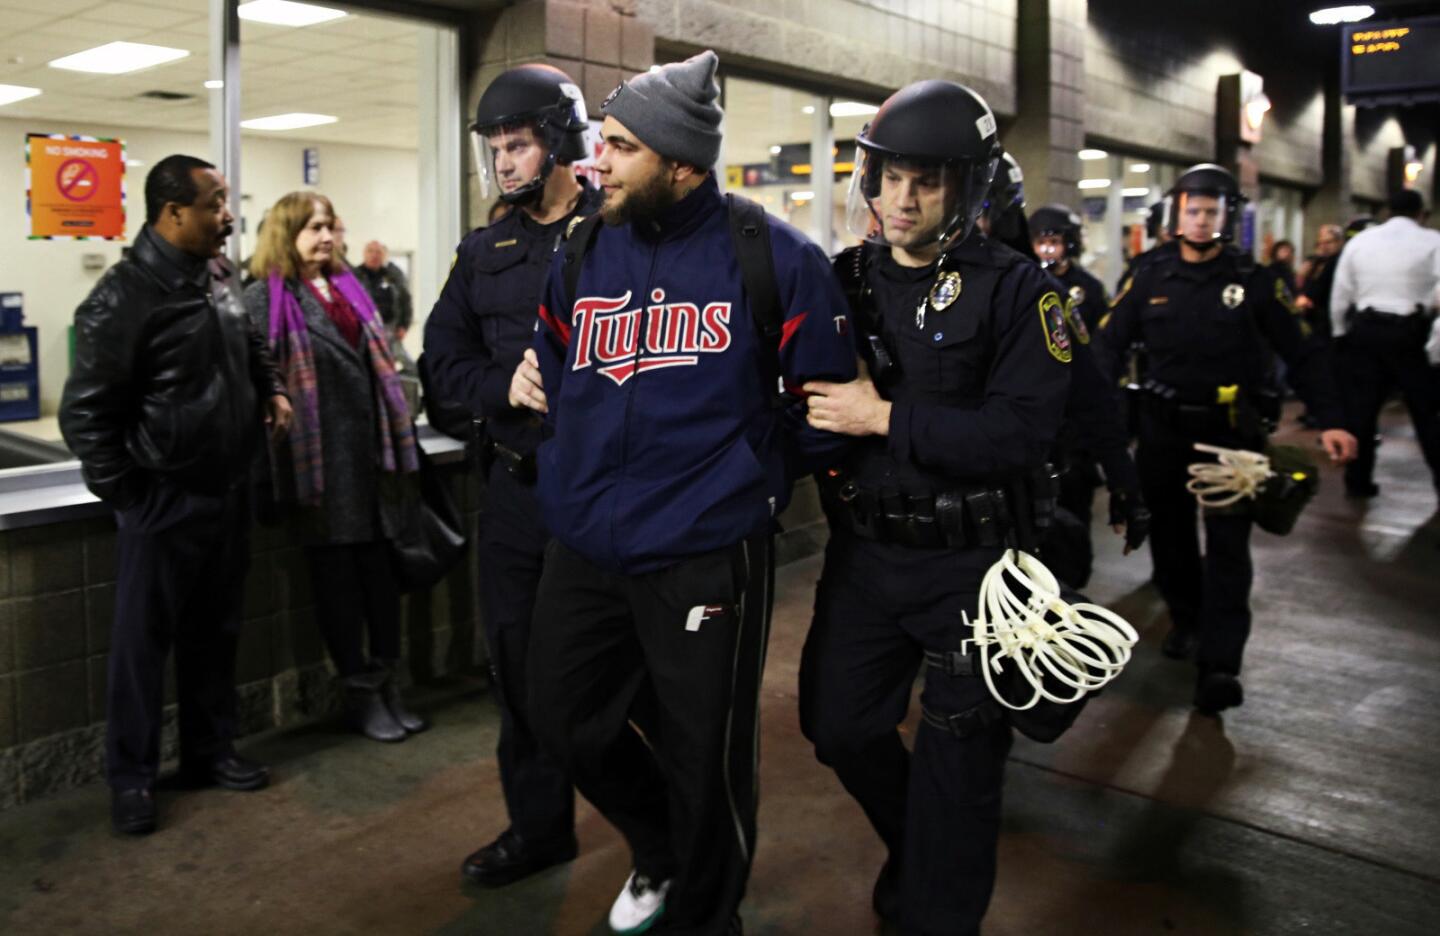 Police officers detain a protester at the Mall of America on Dec. 23, 2015, in Bloomington, Minn.